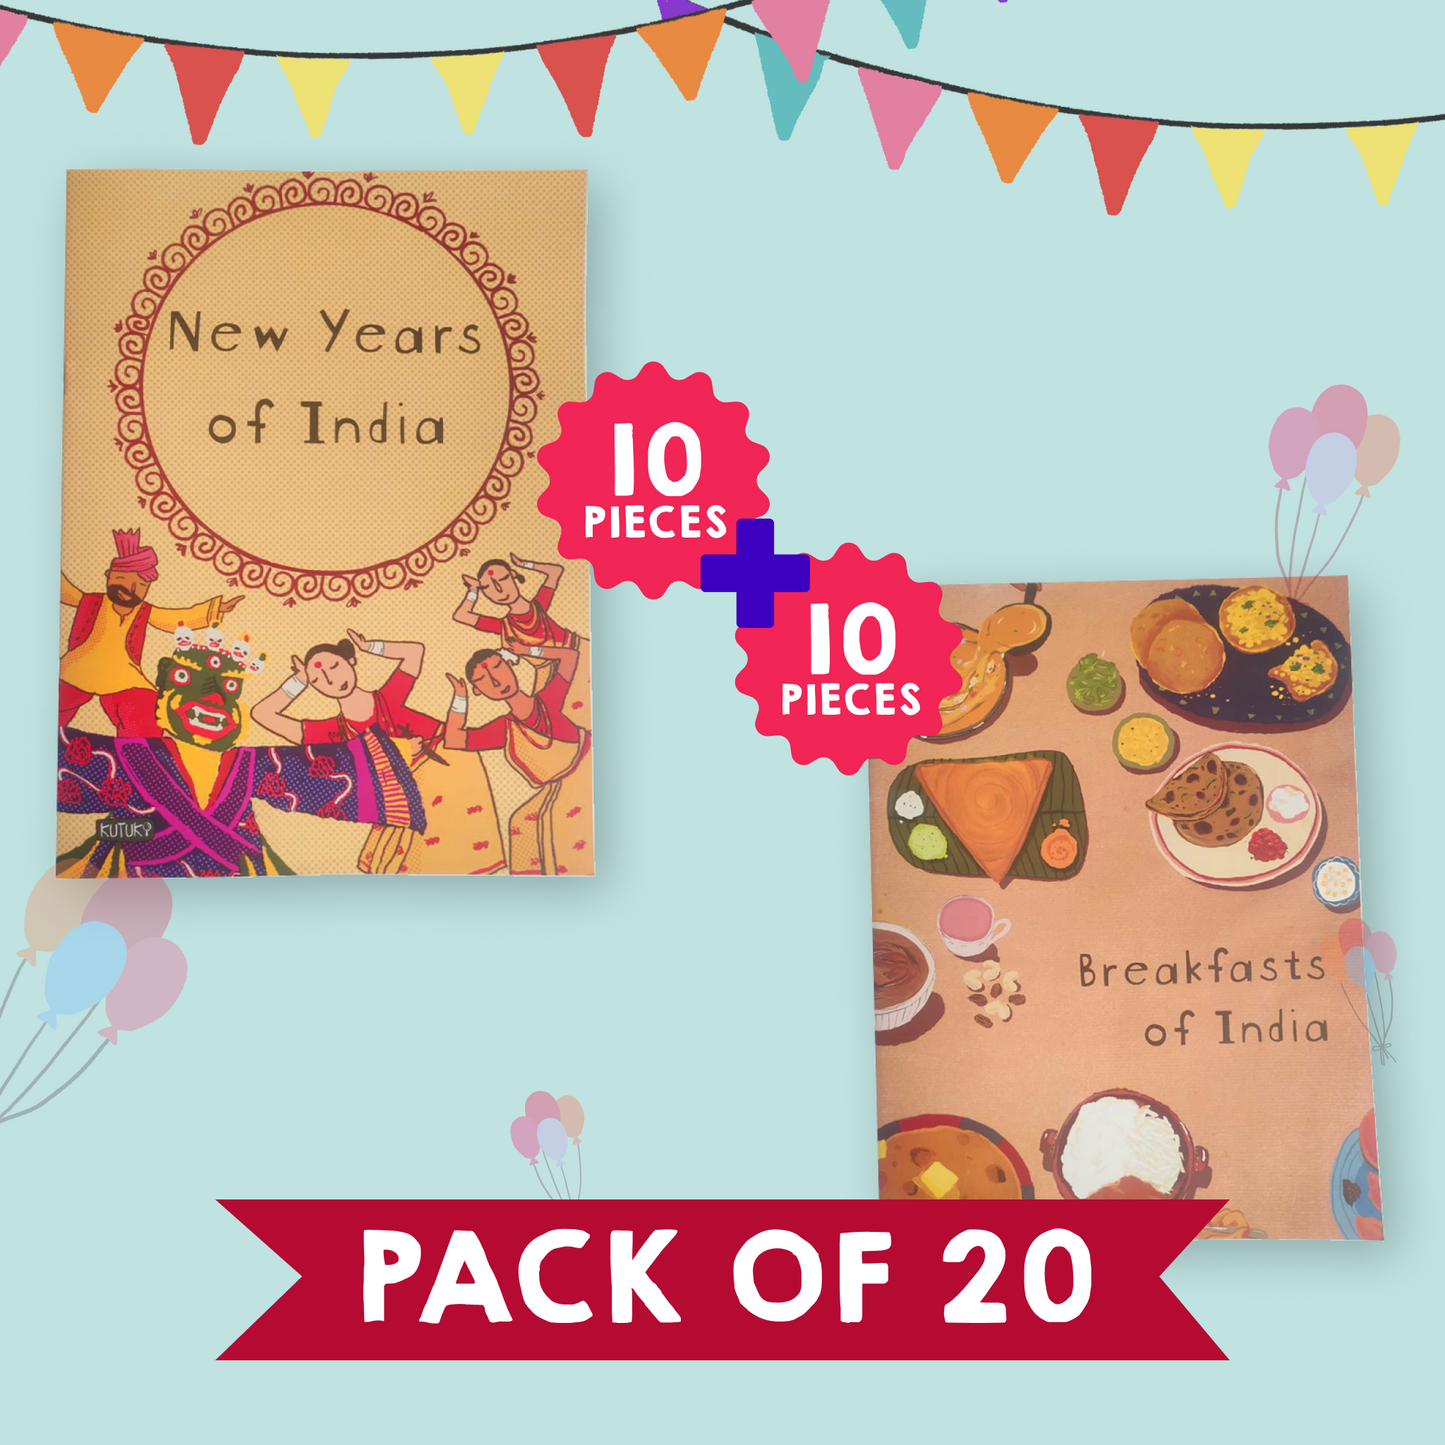 Breakfasts & New Years of India Combo (Pack of 20 books)